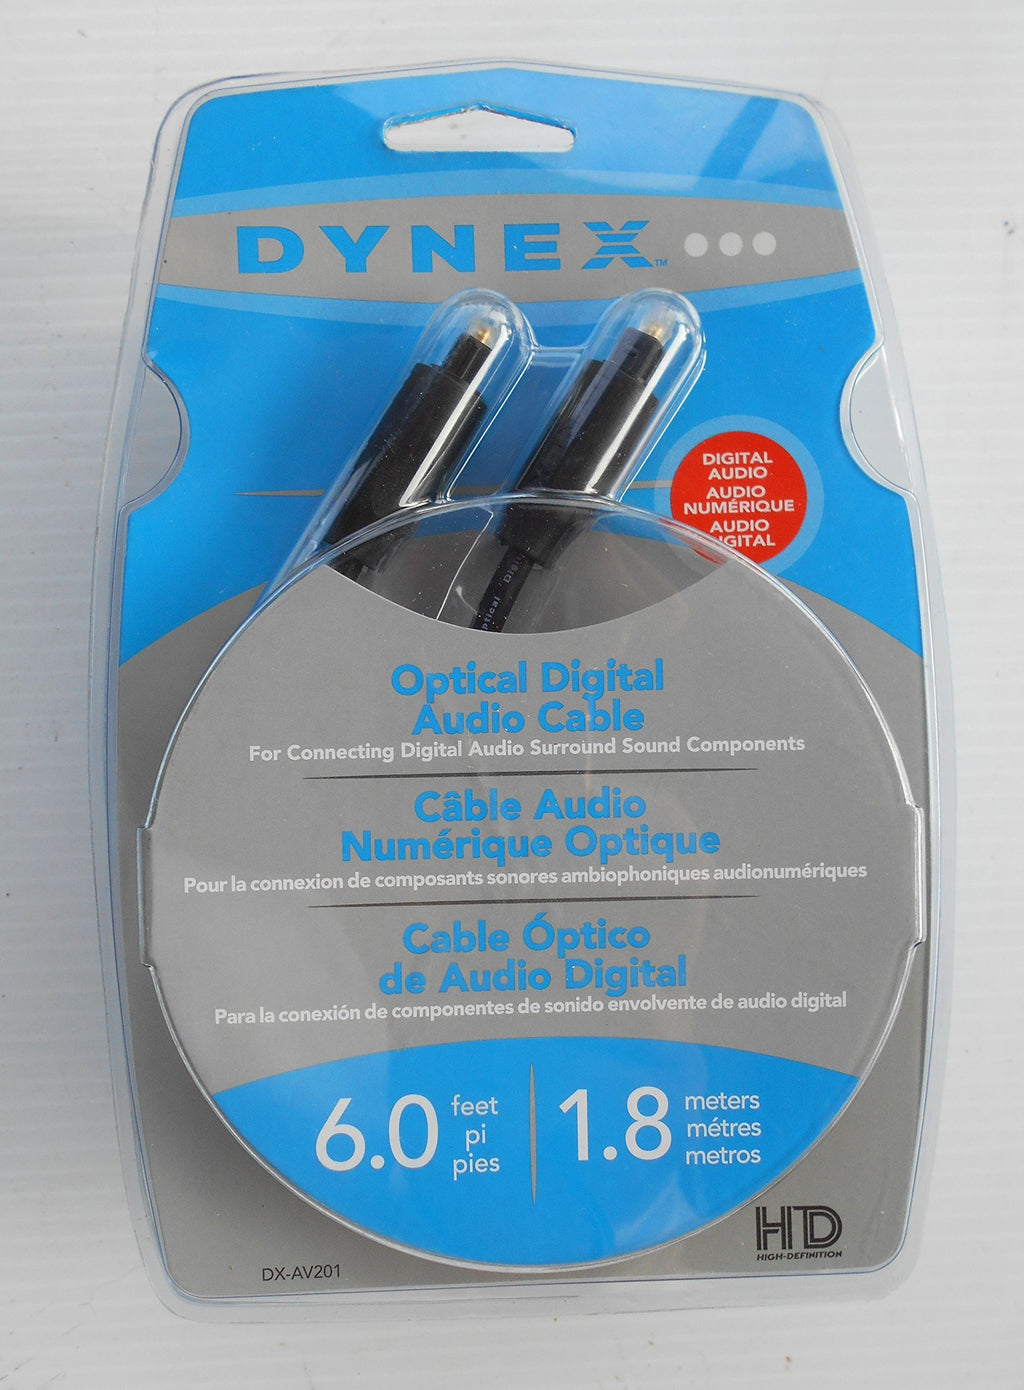 Dynex - 6ft Optical Digital Audio Cable